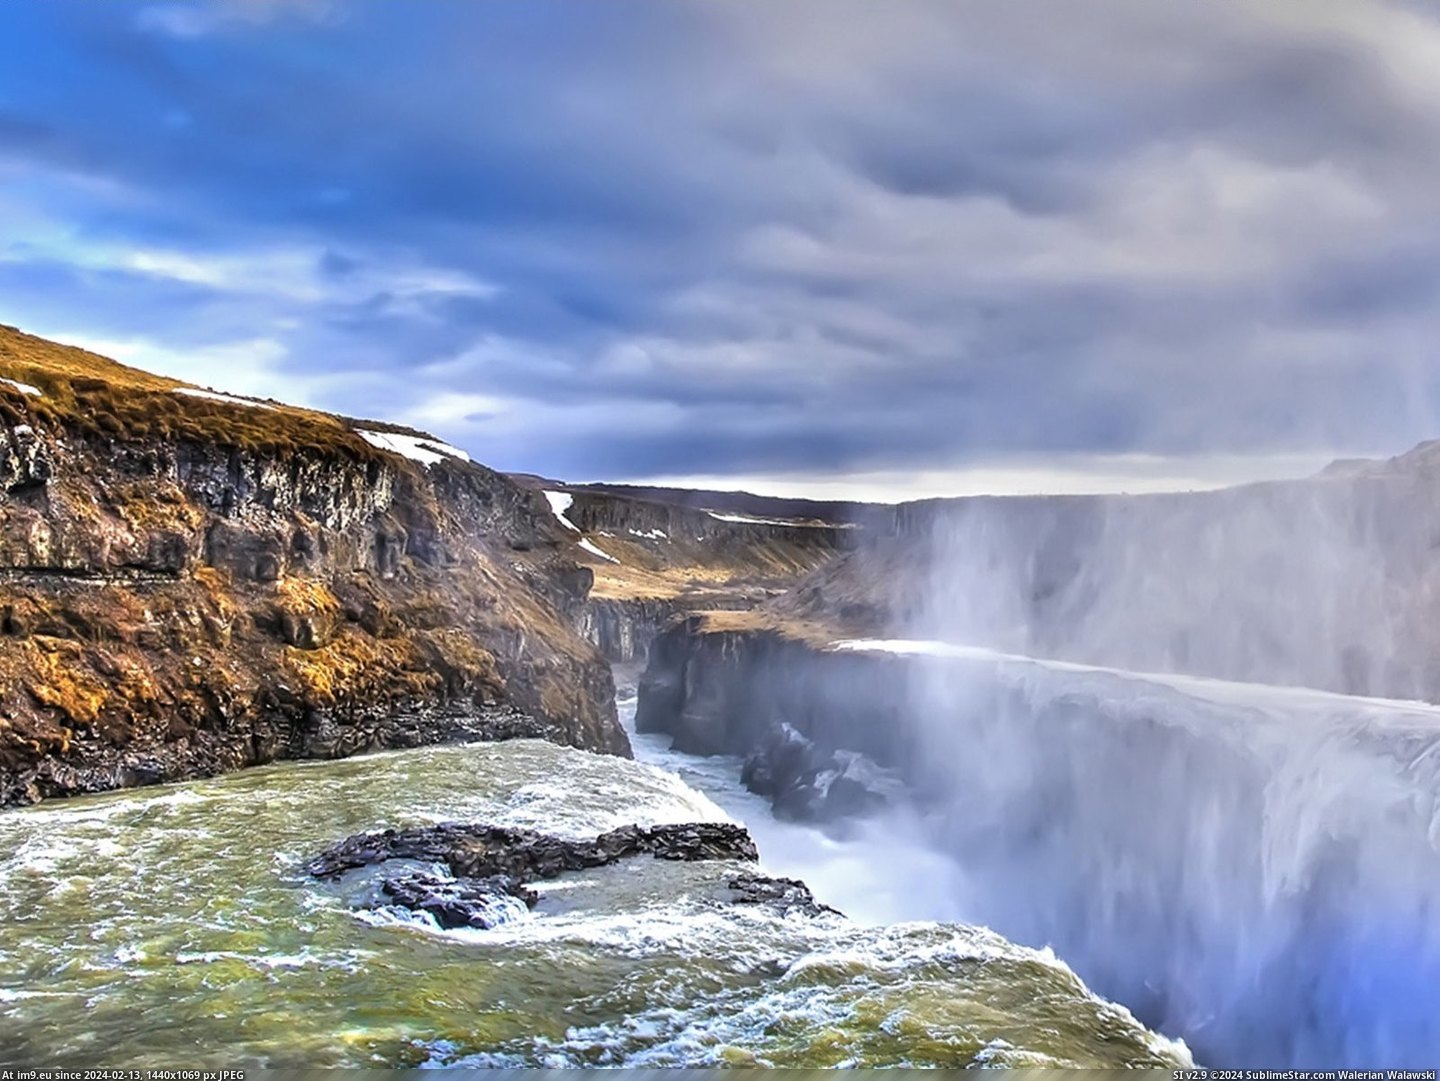 Water Falling Into a Crevasse, Iceland (in Beautiful photos and wallpapers)